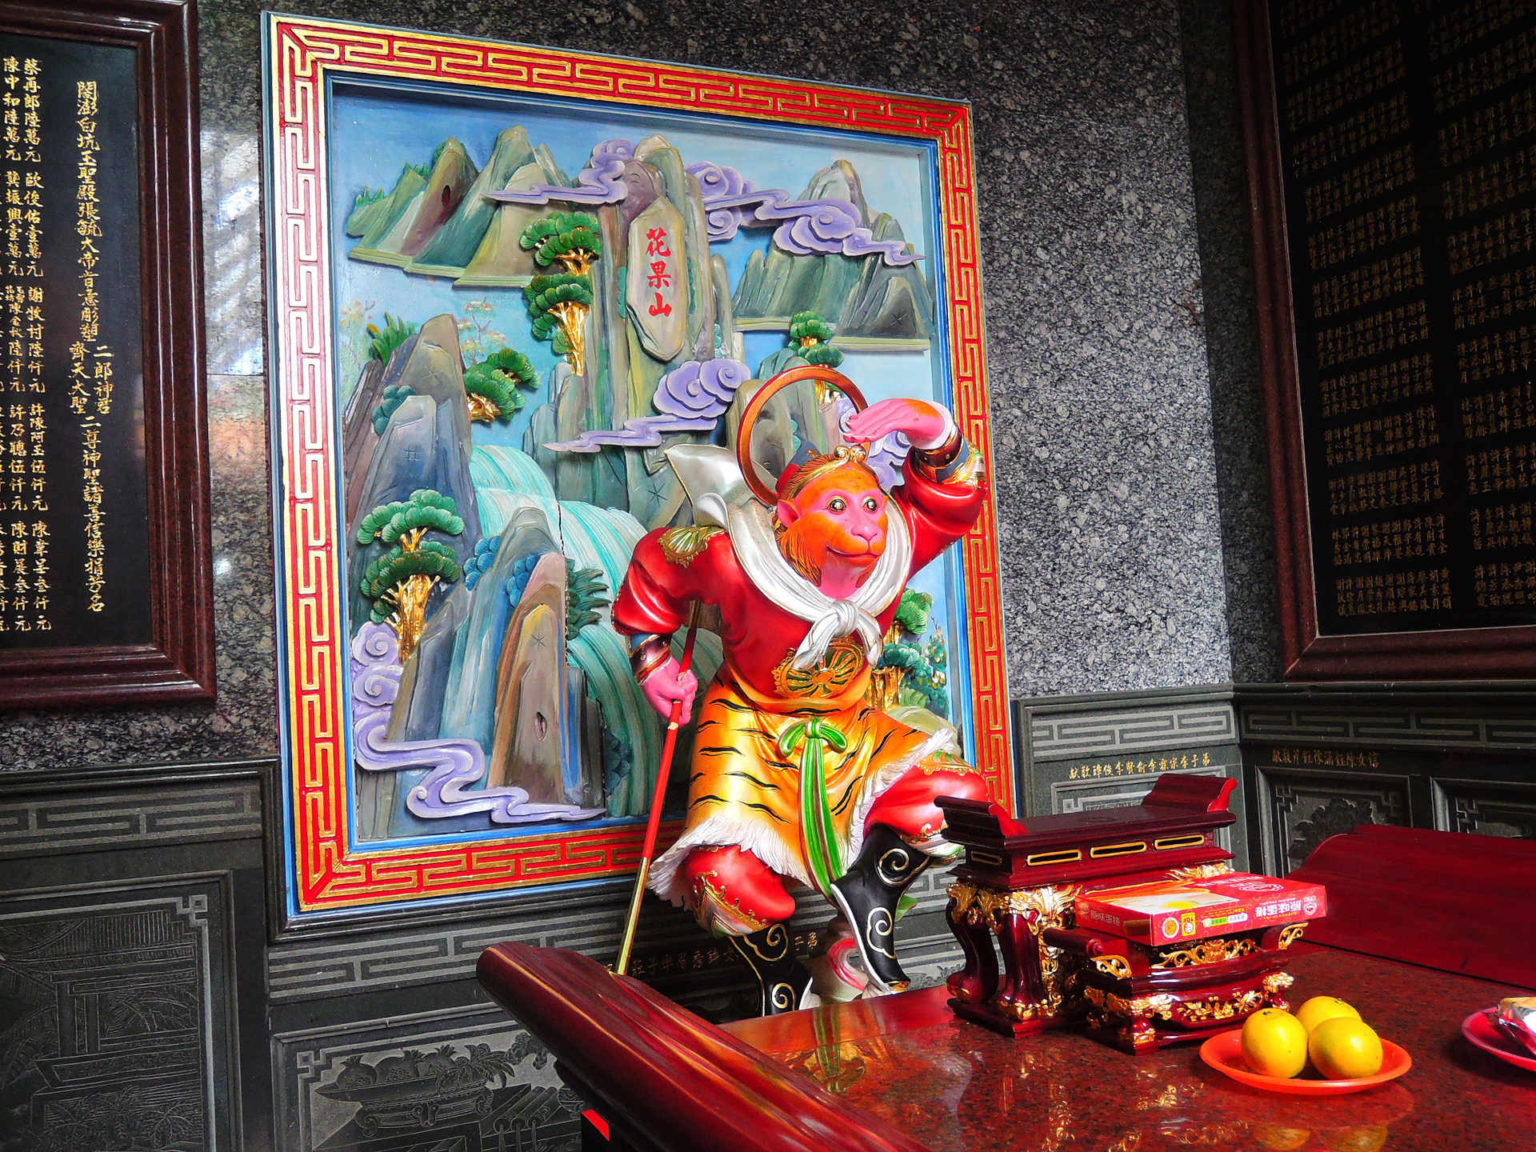 colourful statue of the monkey god inside taiwan temple dedicated to jade emperor